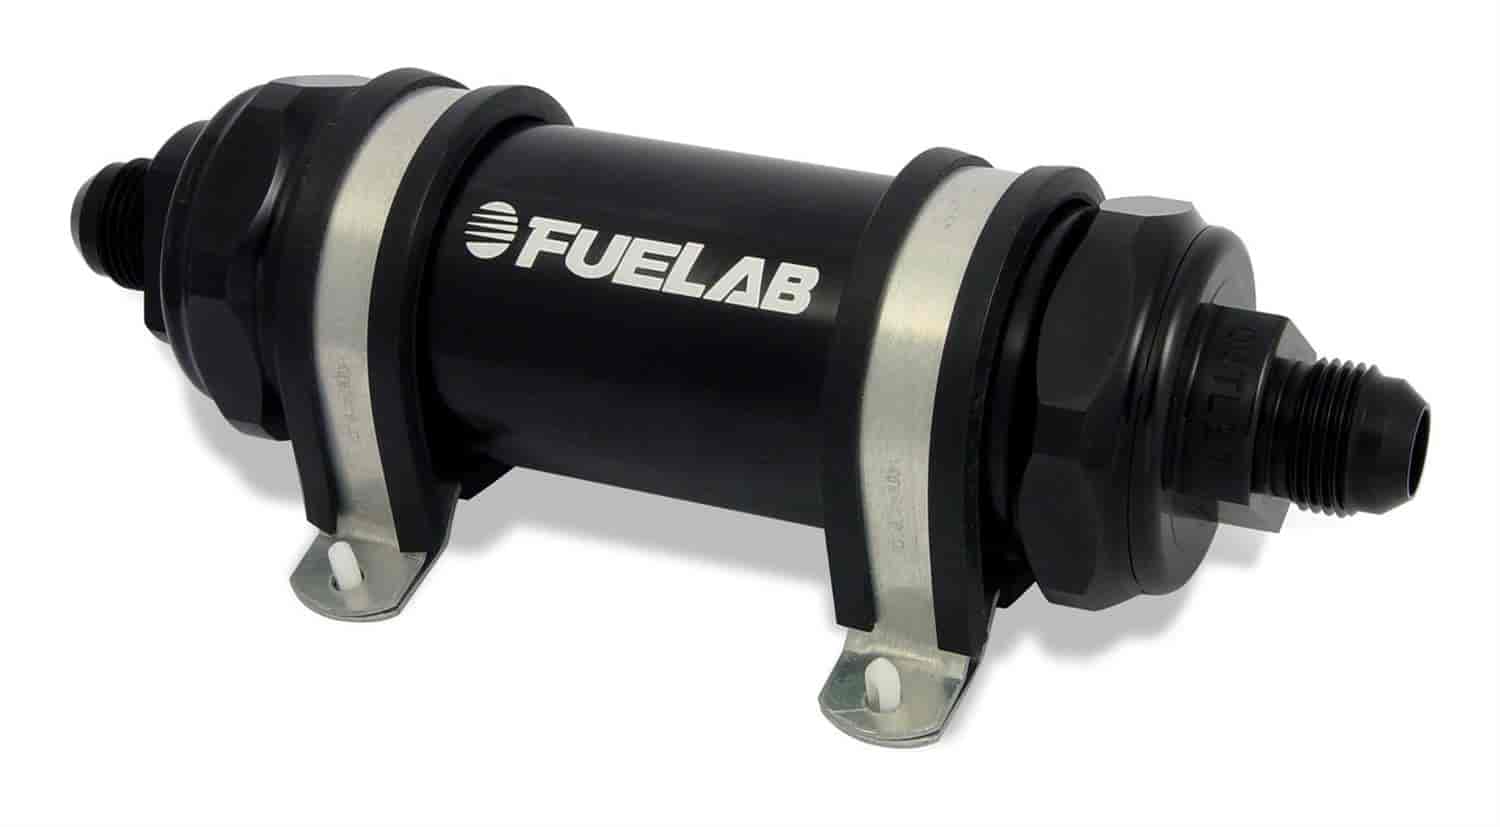 In-Line Fuel Filter Long Length -6AN Inlet/-10AN Outlet 75 micron stainless steel element